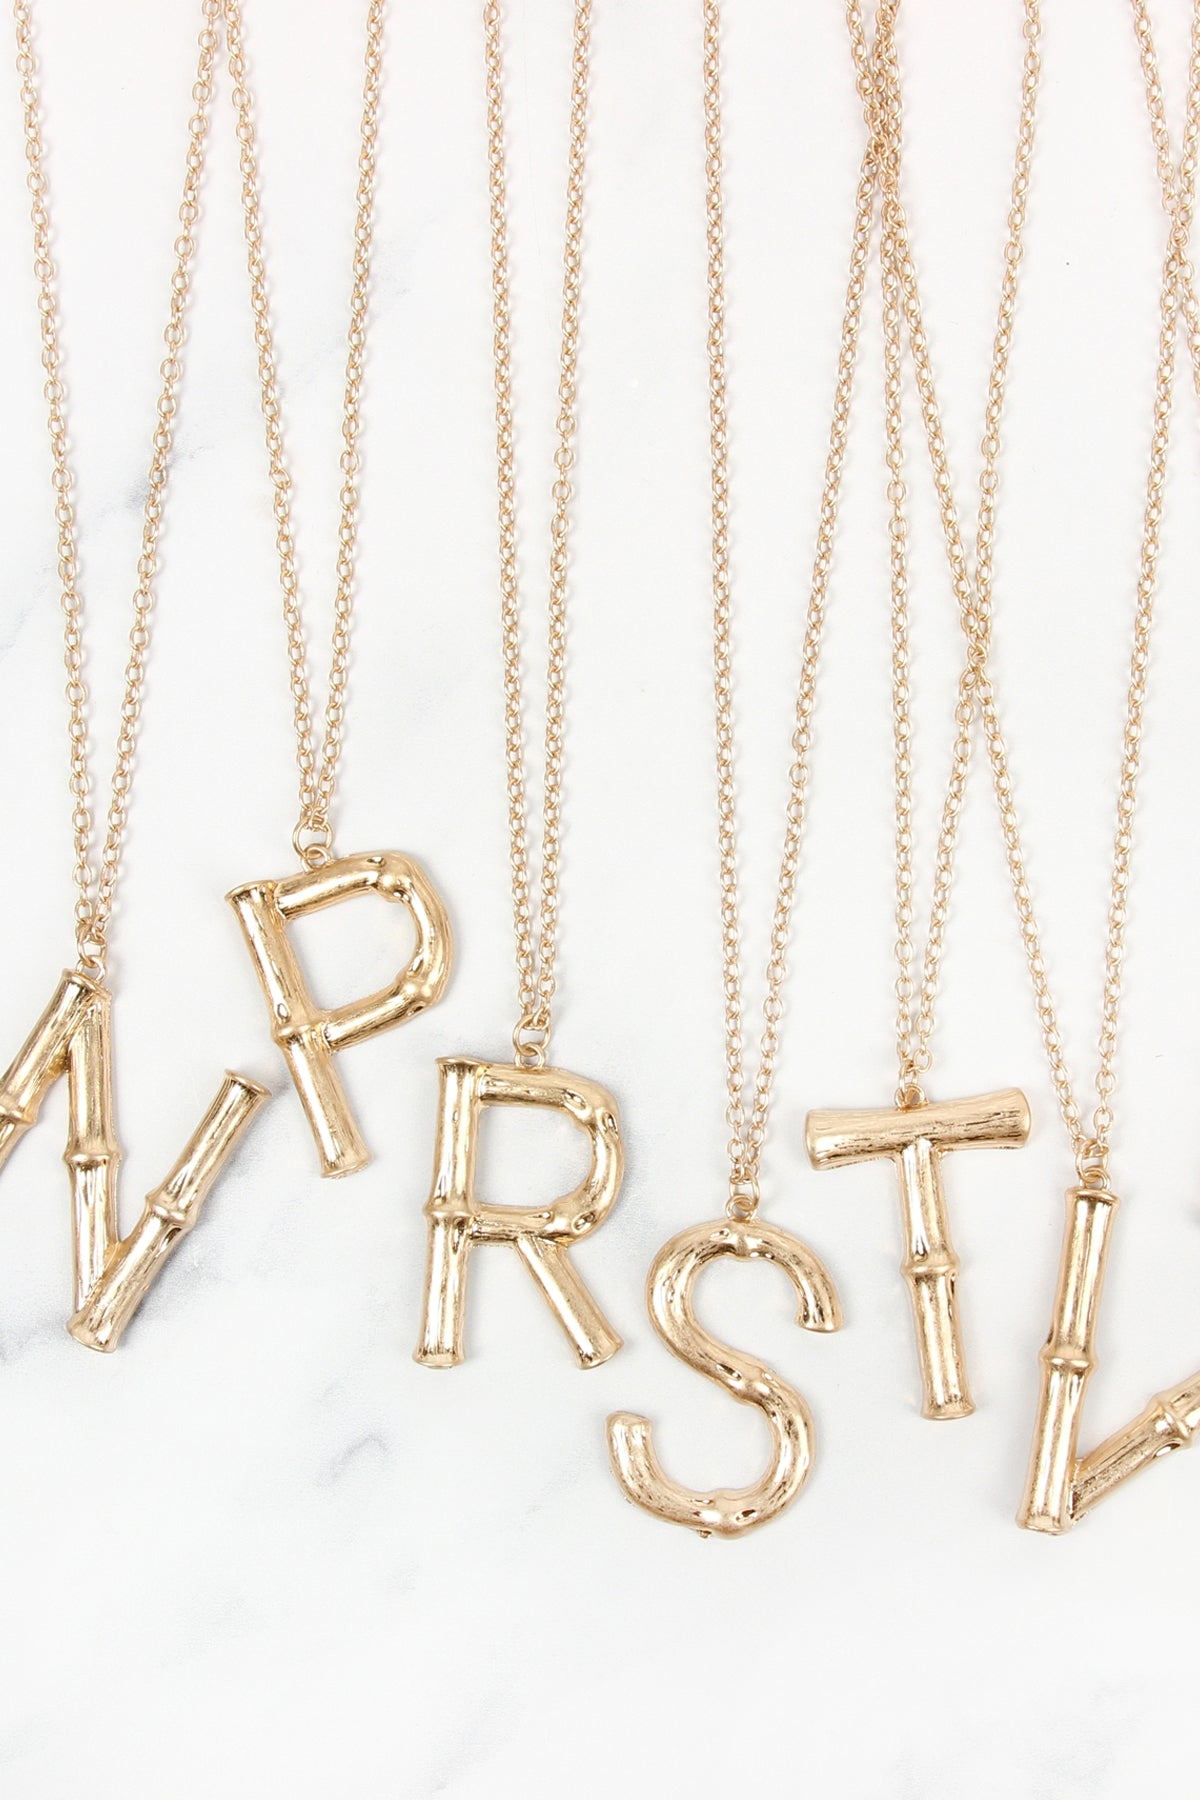 "V" CAST METAL BAMBOO ALPHABET NECKLACE WITH STUD EARRING SET/6SETS